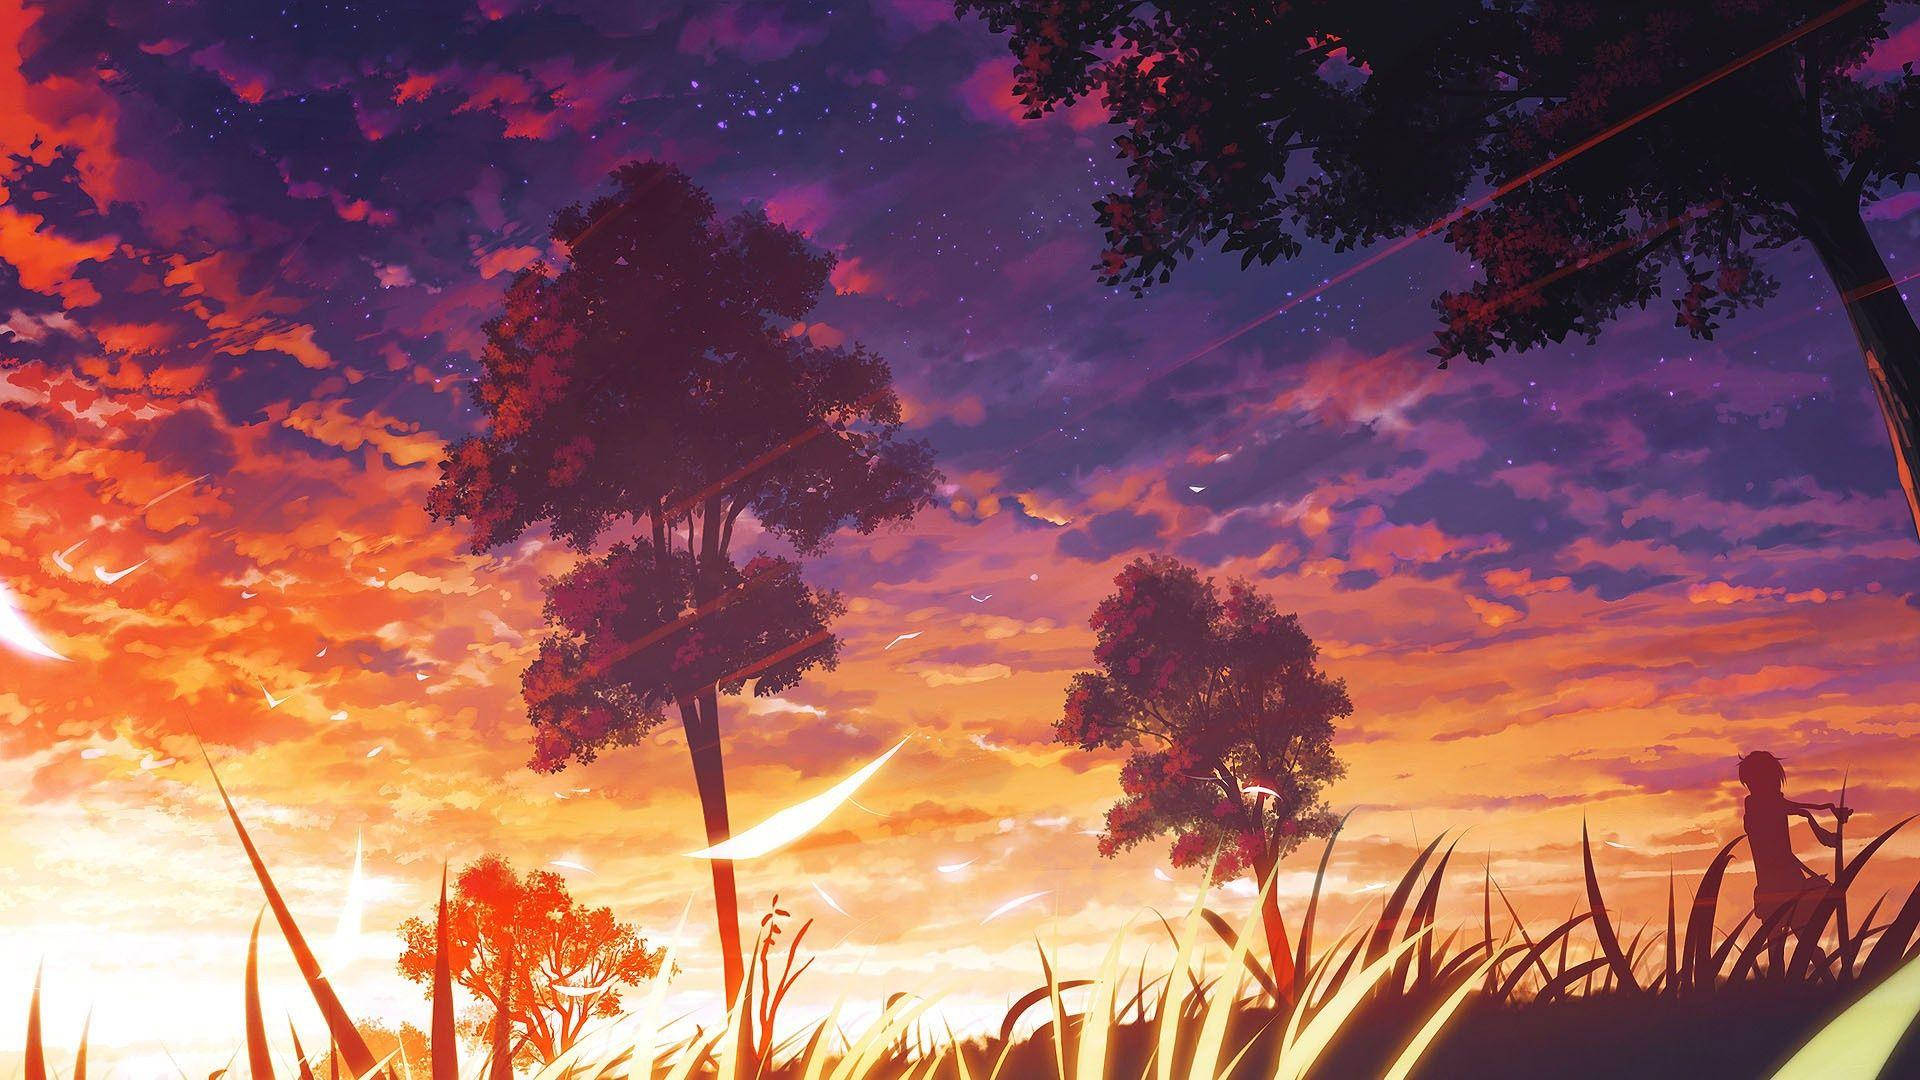 Trees And Clouds Anime Aesthetic Sunset Wallpaper